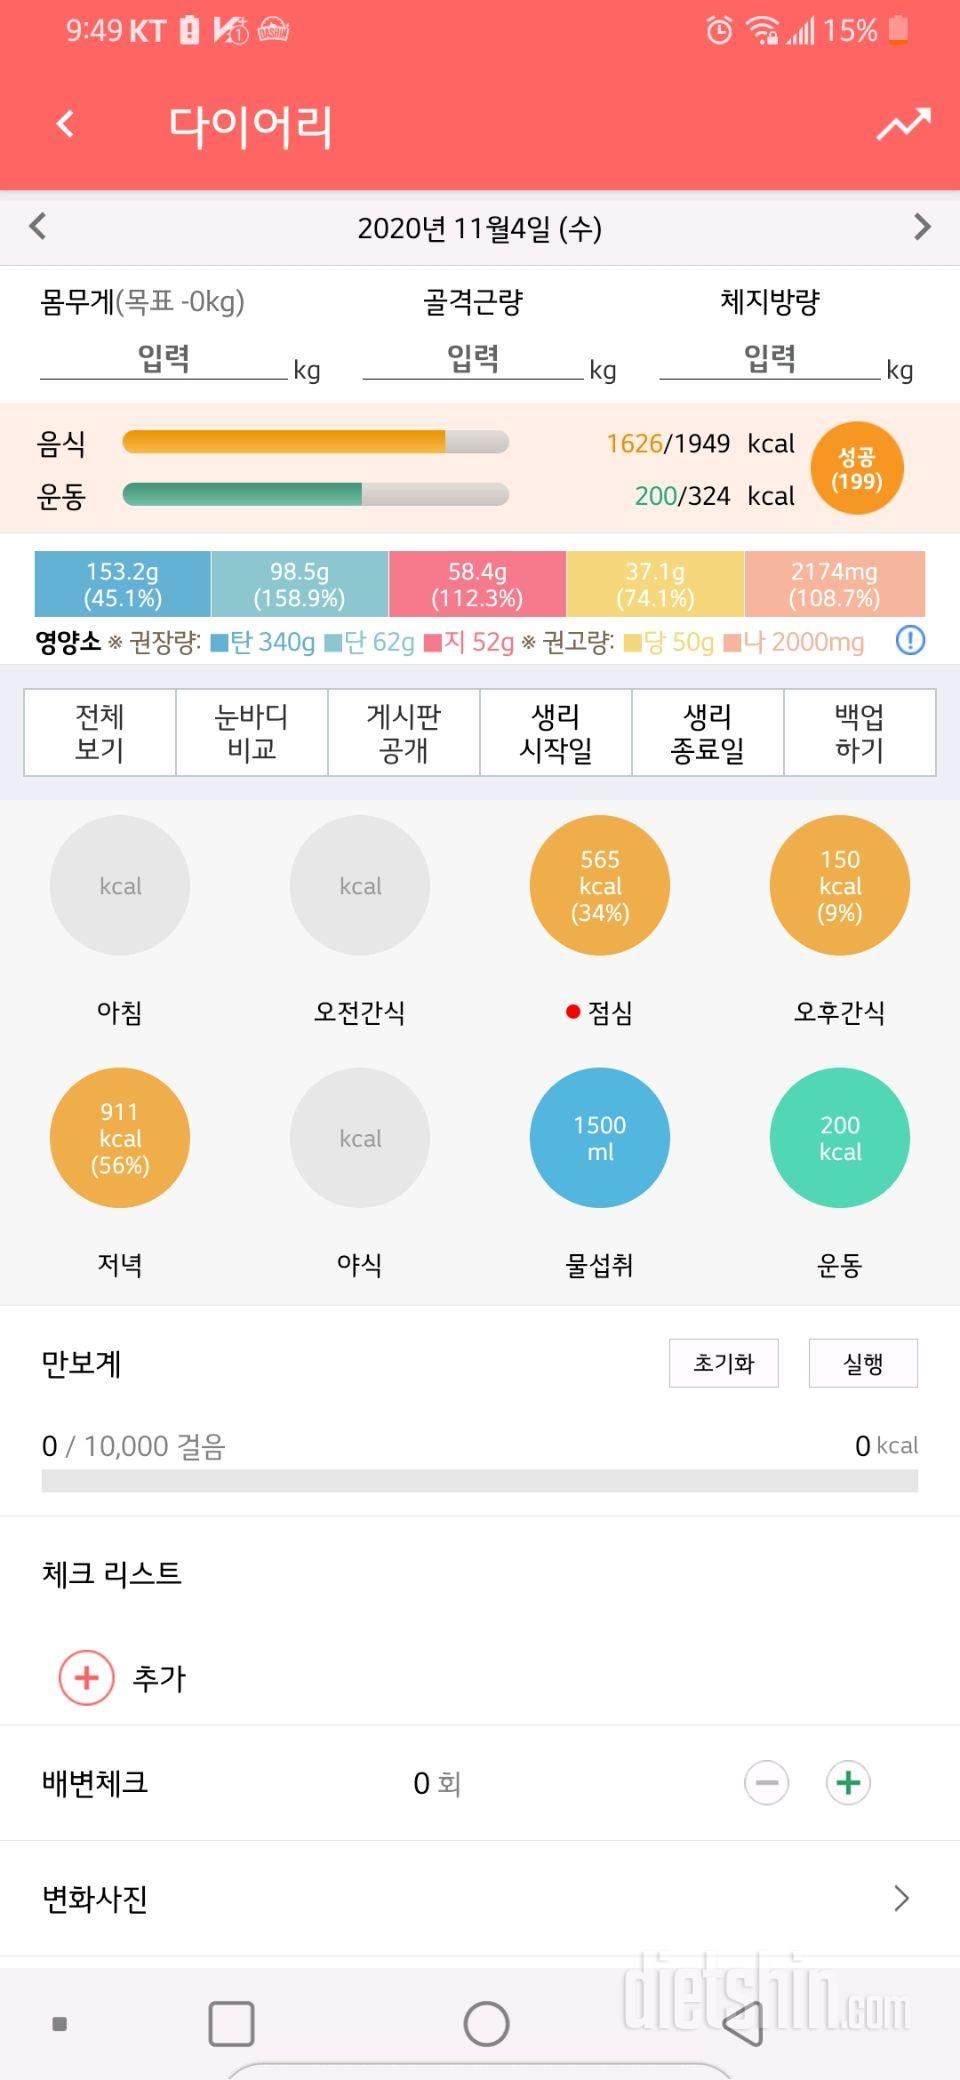 11월 4일 수욜